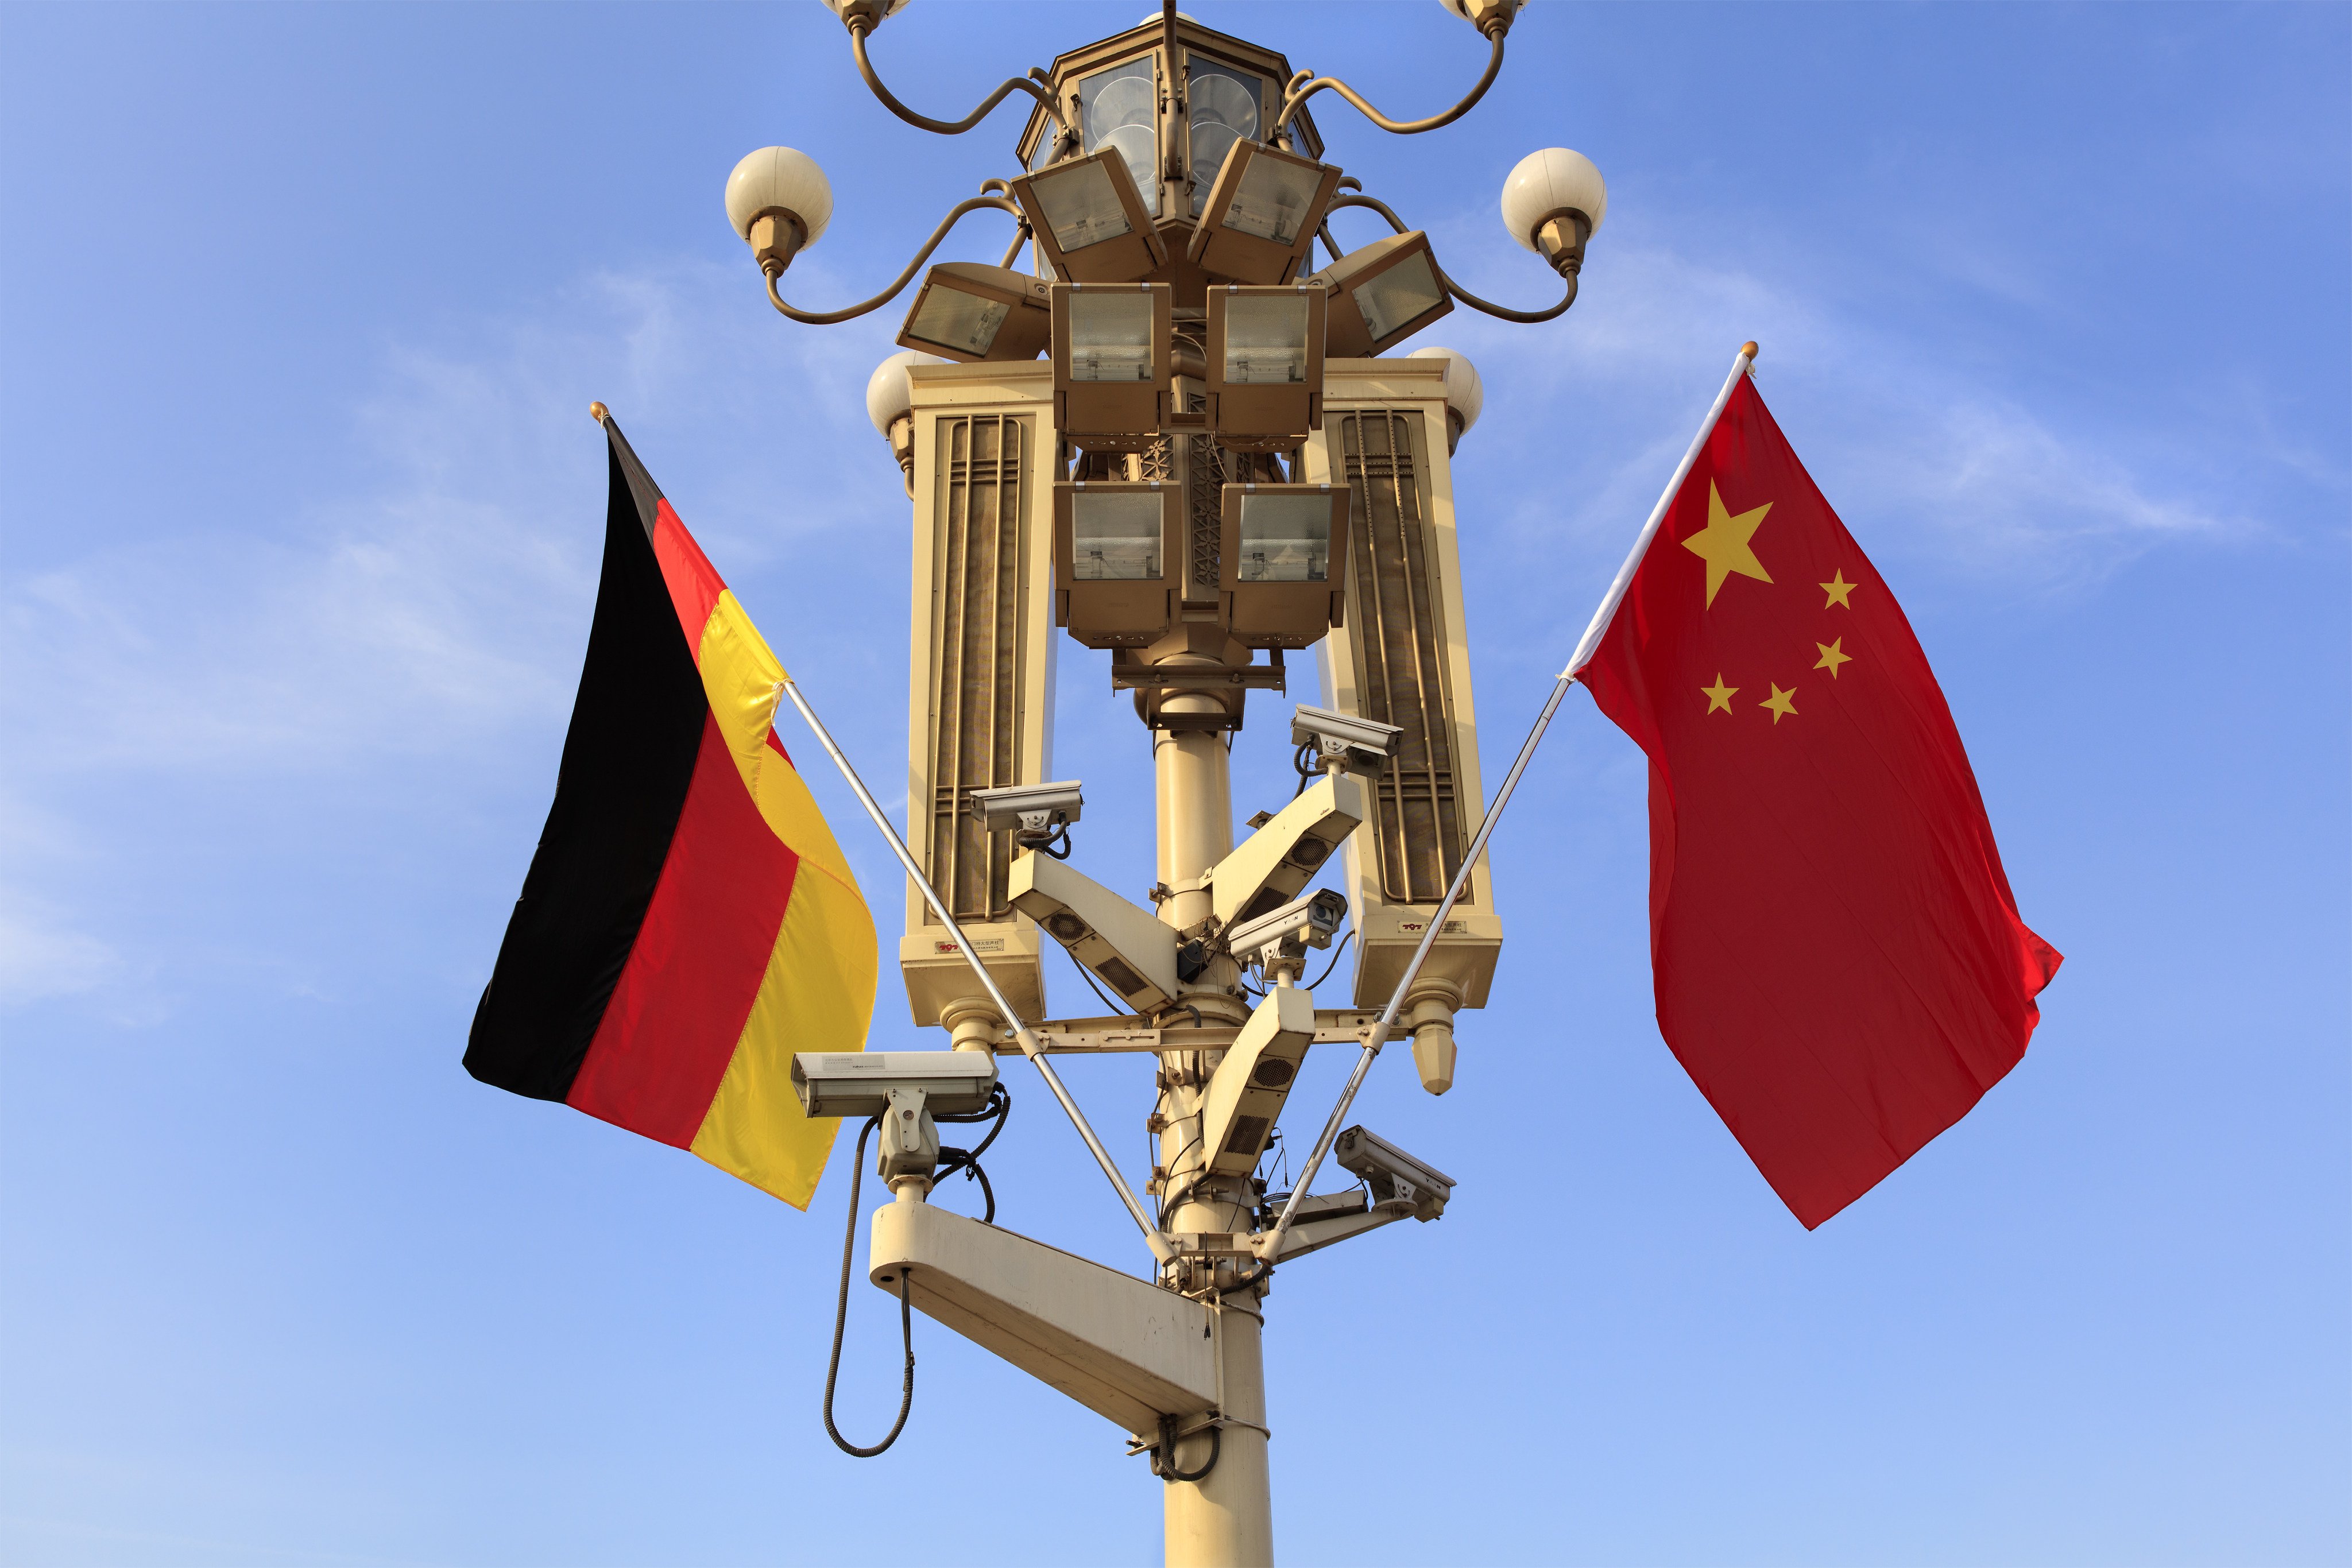 German and Chinese national flags flutter on a lamppost at Tiananmen Gate during the visit of then German president Joachim Gauck in China in March 2016. Over the past 50 years, the relationship between Berlin and Beijing has been characterised by mutual respect, pragmatism and the will to benefit from each other. Photo: Shutterstock